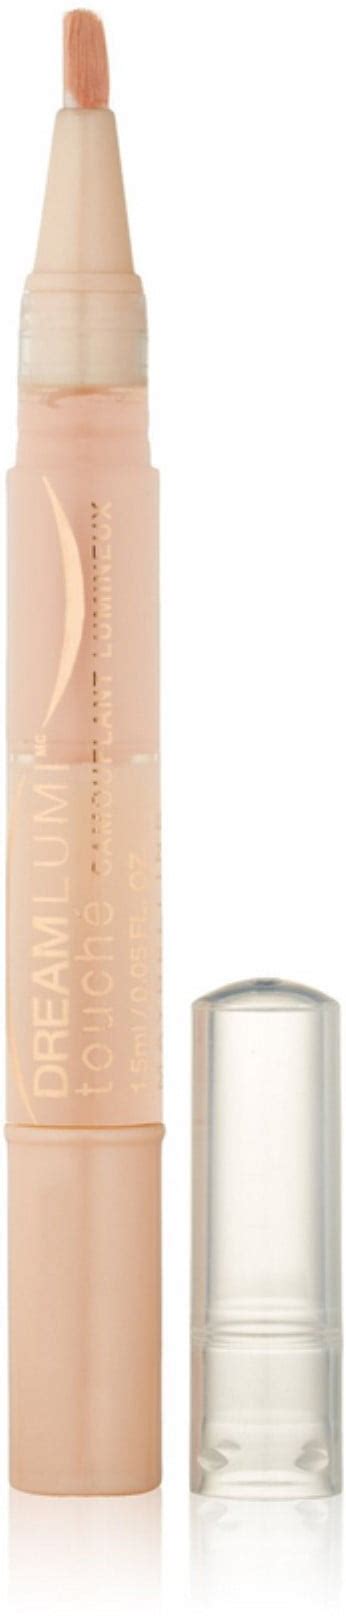 Maybelline Dream Lumi Touch Highlighting Concealer Radiant